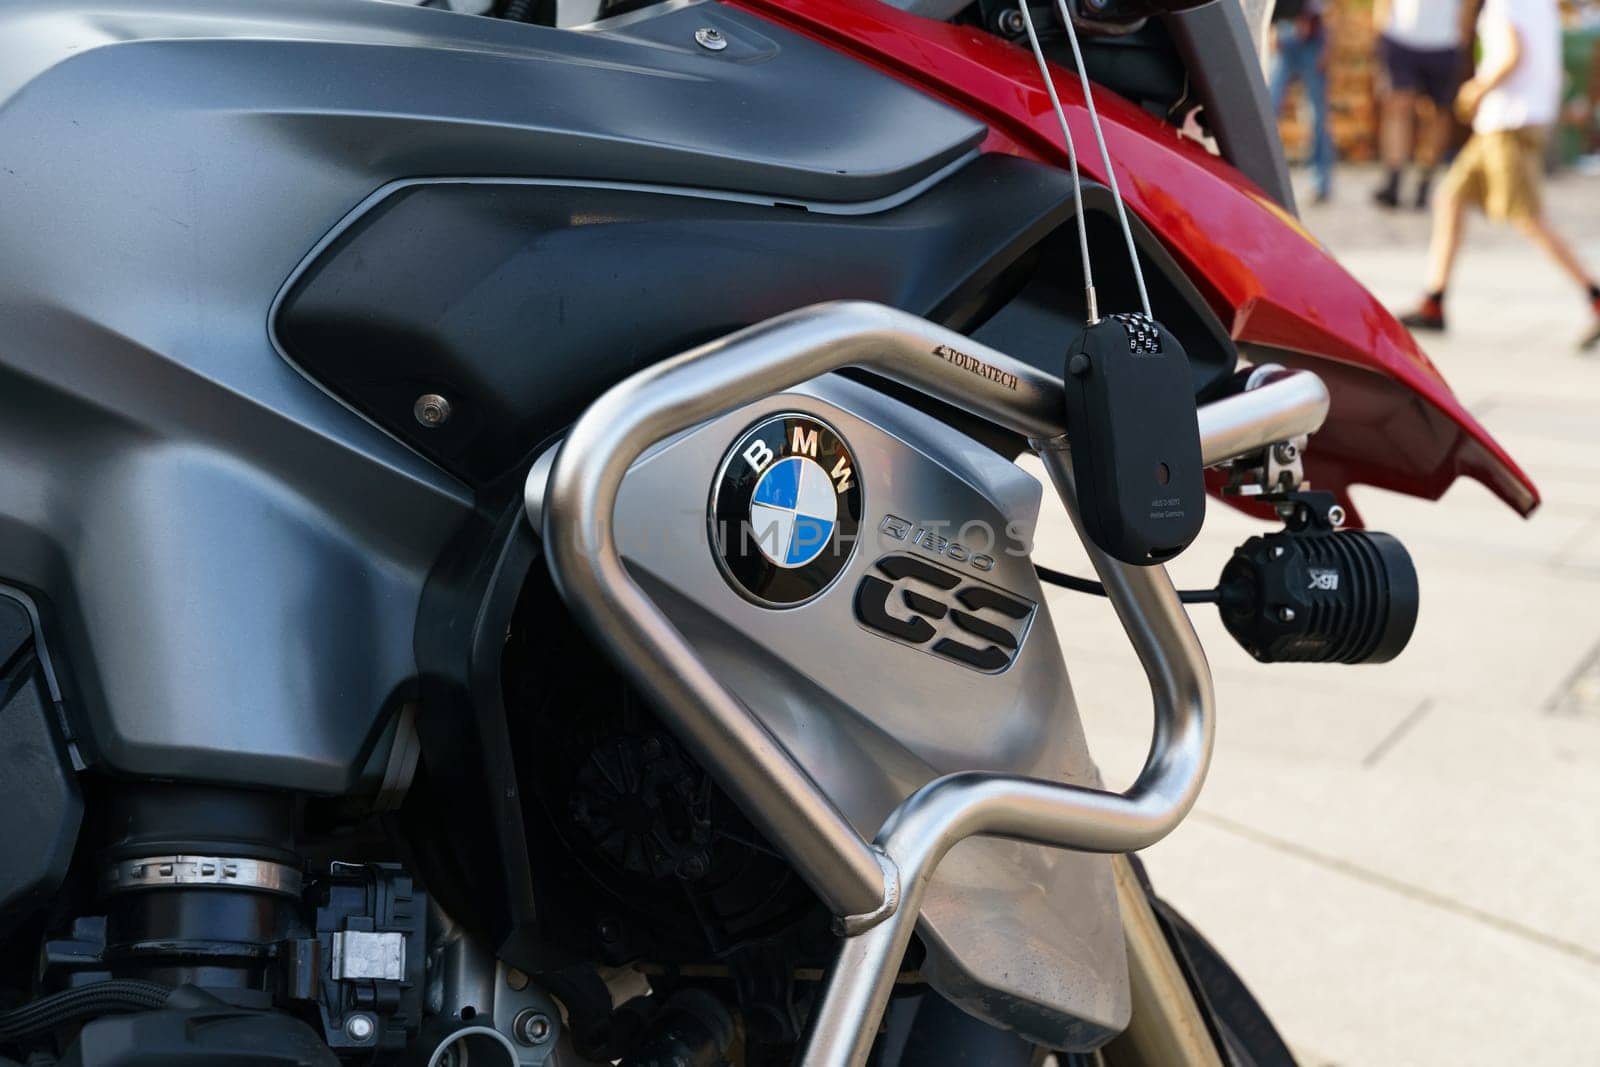 Detailed view of the BMW R1200 motorcycle. by Sd28DimoN_1976